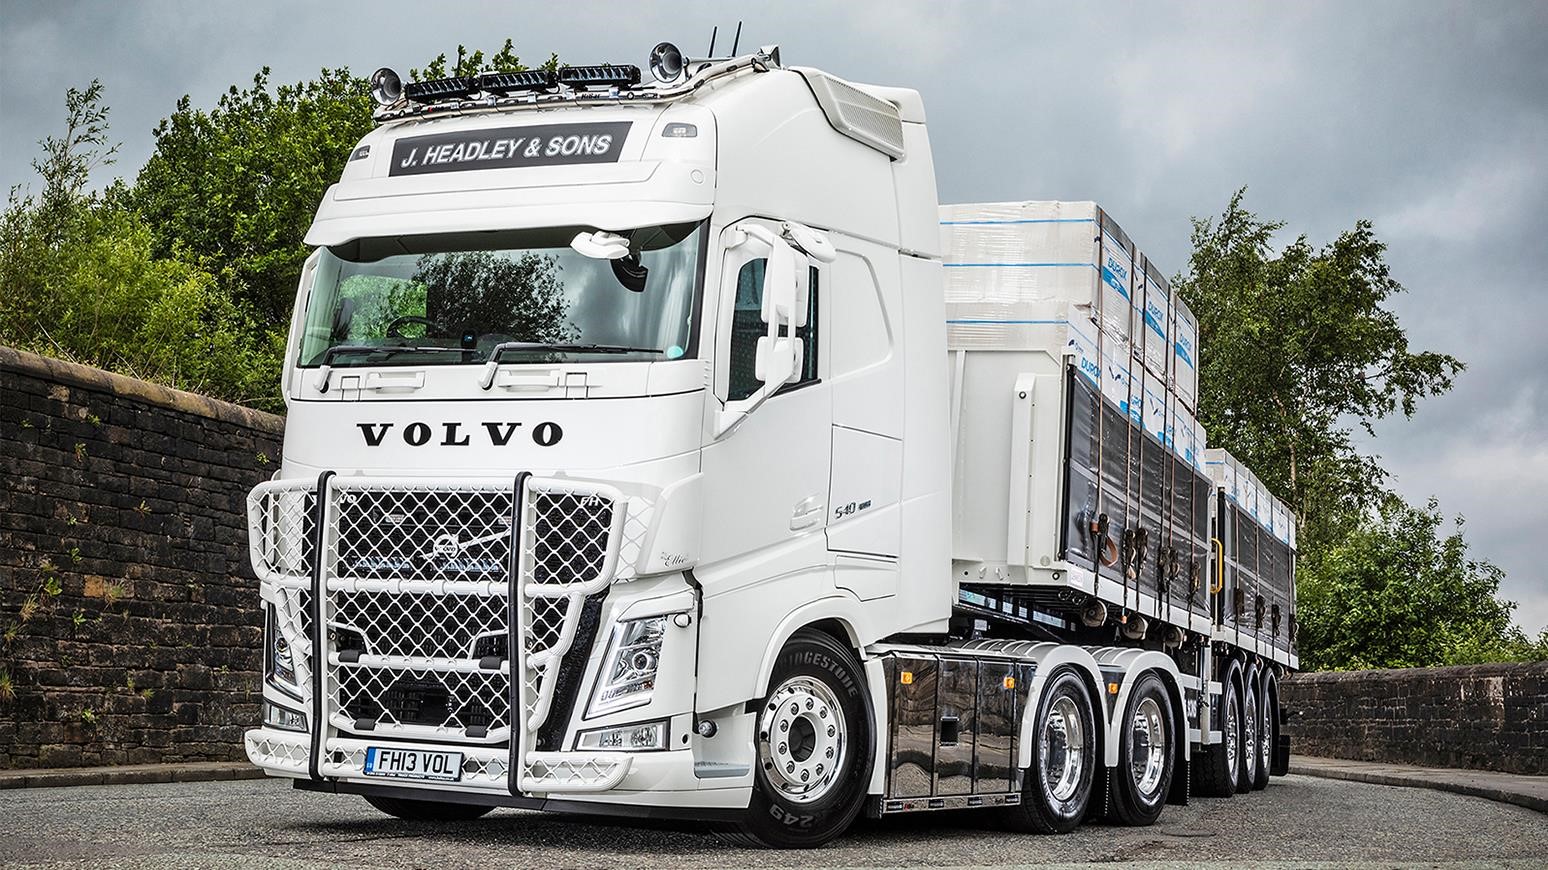 Manchester-Based G. Headley Transport Adds New Volvo FH-540 Truck To Its Fleet